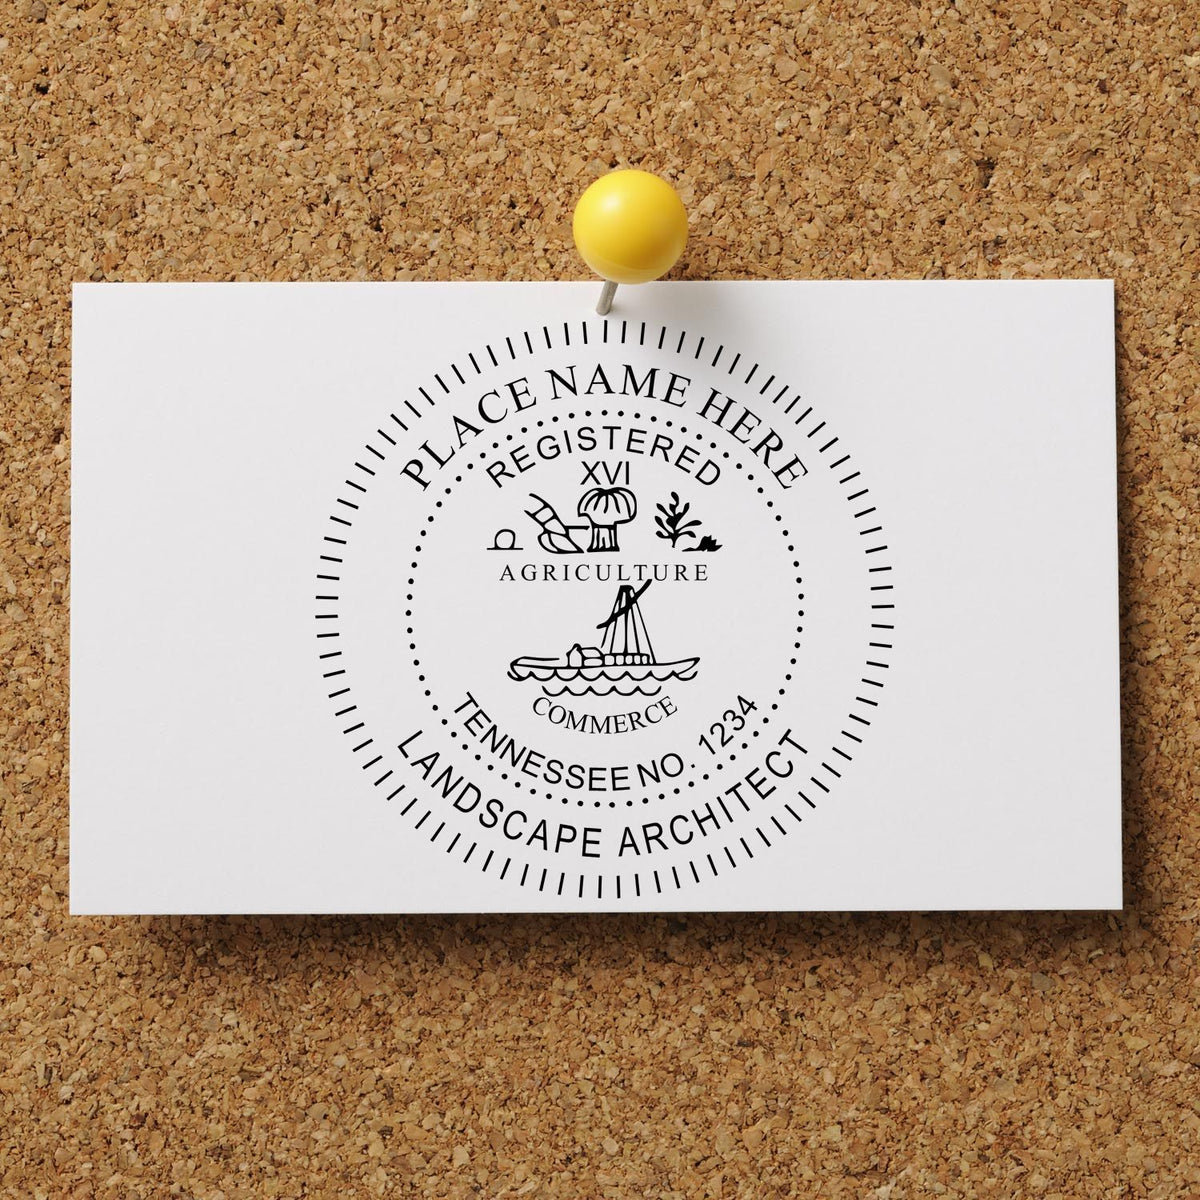 This paper is stamped with a sample imprint of the Slim Pre-Inked Tennessee Landscape Architect Seal Stamp, signifying its quality and reliability.